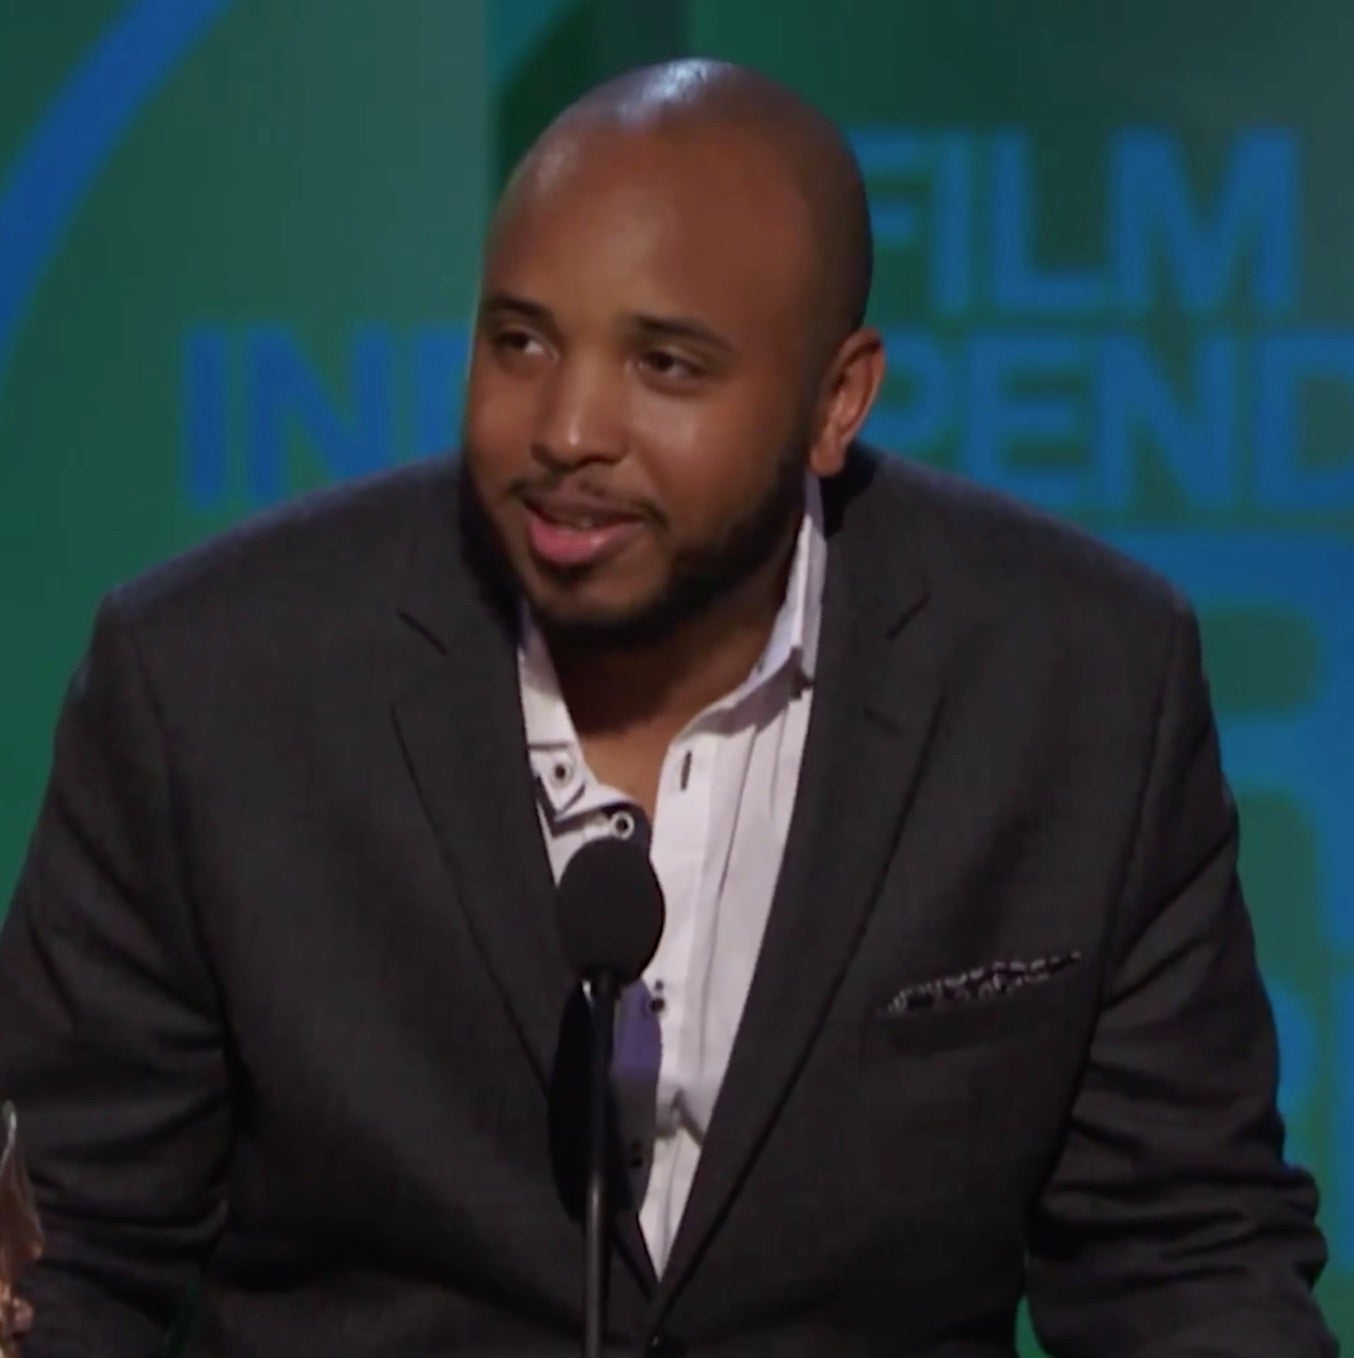 Must See: 'Dear White People' Director Calls For More Diversity in Film Industry